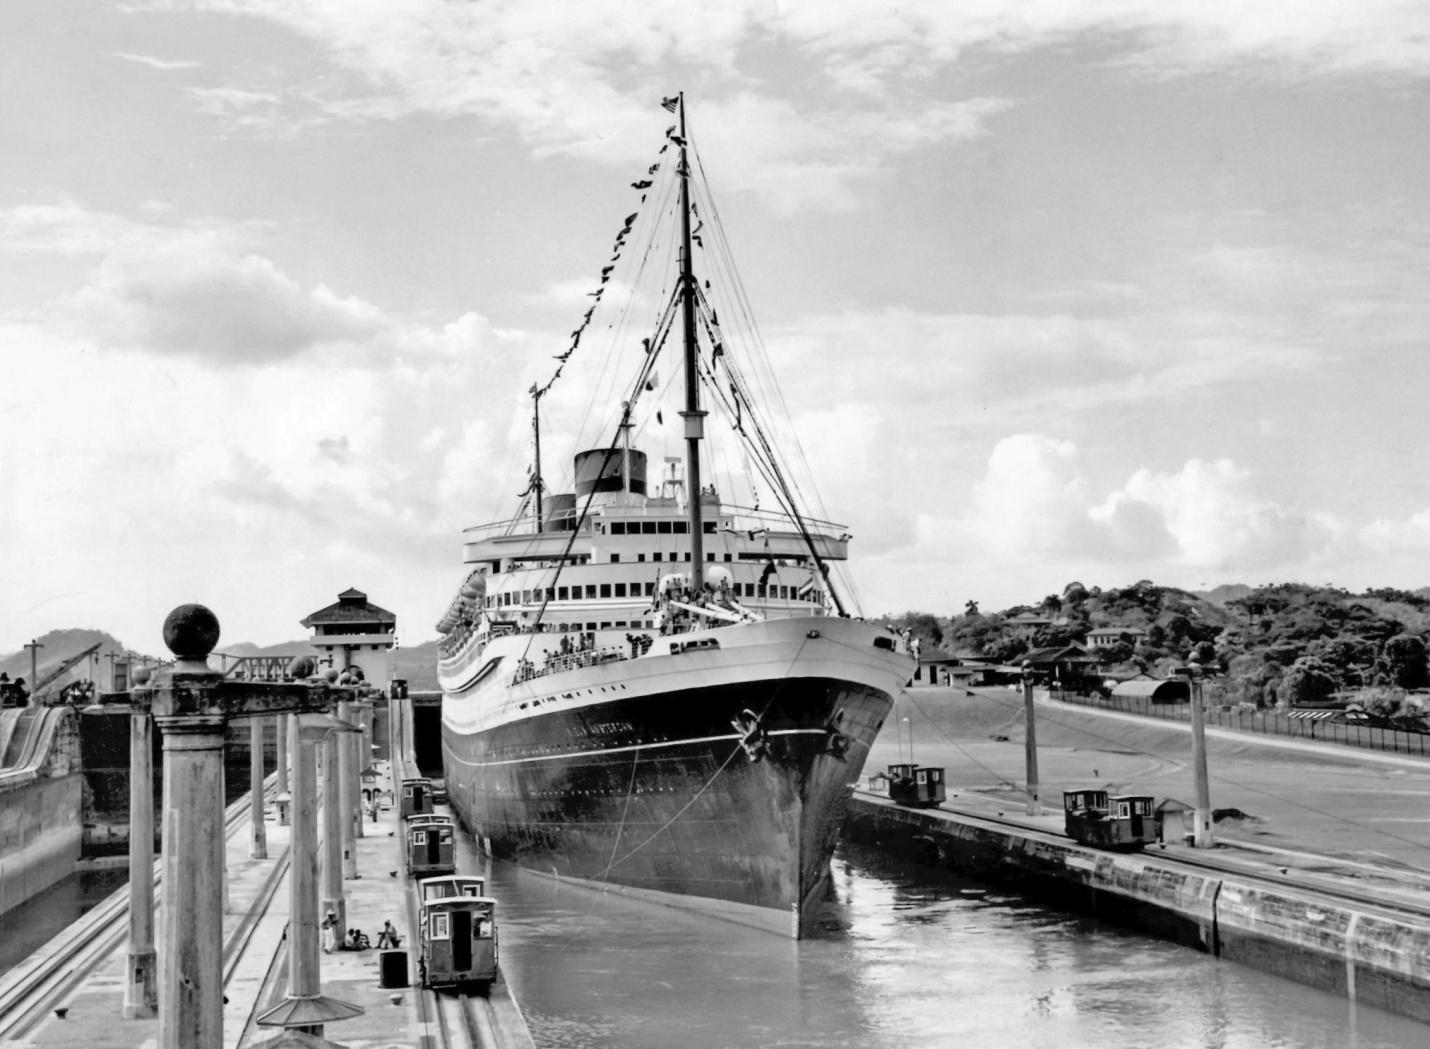 D:\Bill\Pictures\Tony90\Jun 19 2019\Ships B & W  Done\Nieuw Amsterdam in Pananma Canal Oct 1955.jpg